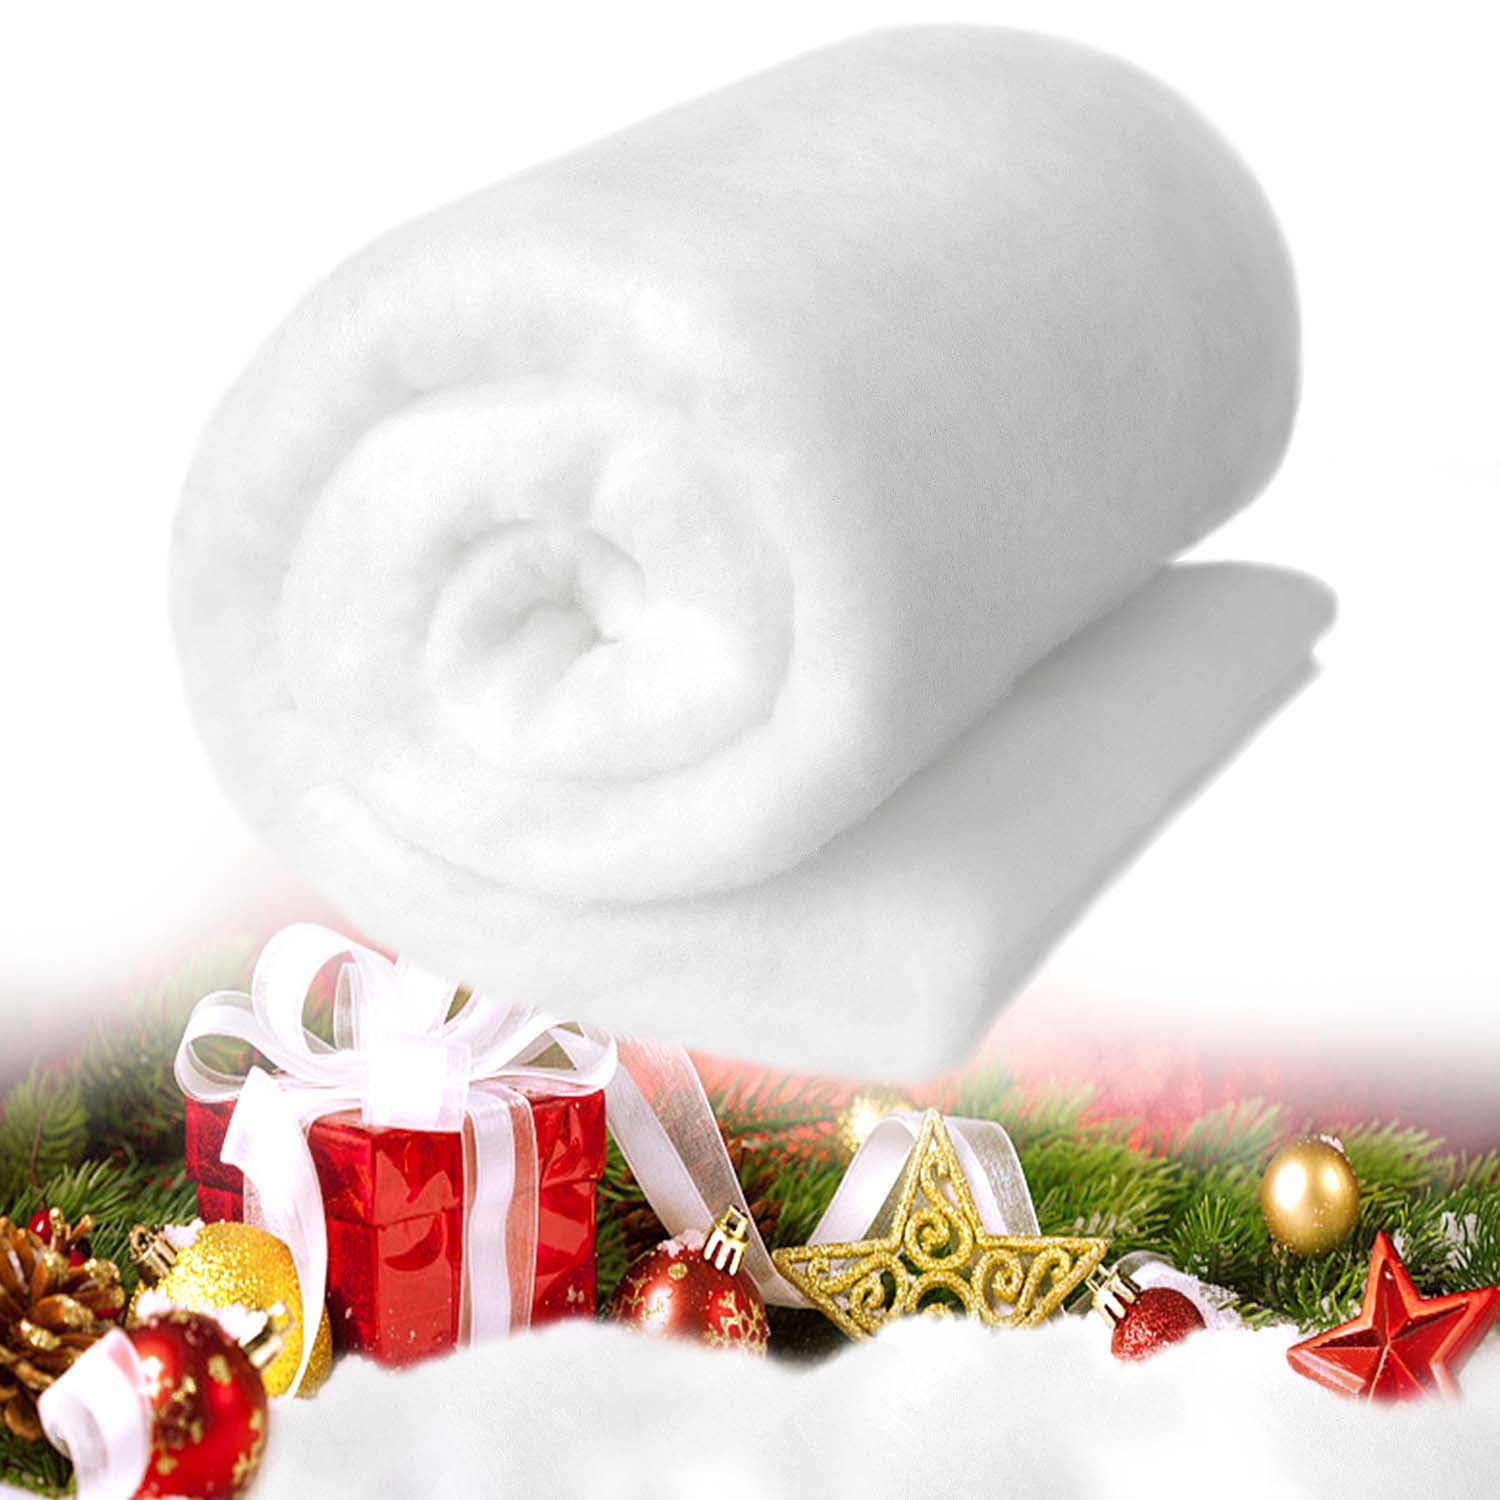 Christmas Snow Blanket Roll for Christmas Decorations, Village Displays,  Under the Christmas Tree Thick White Soft Fluff - AliExpress